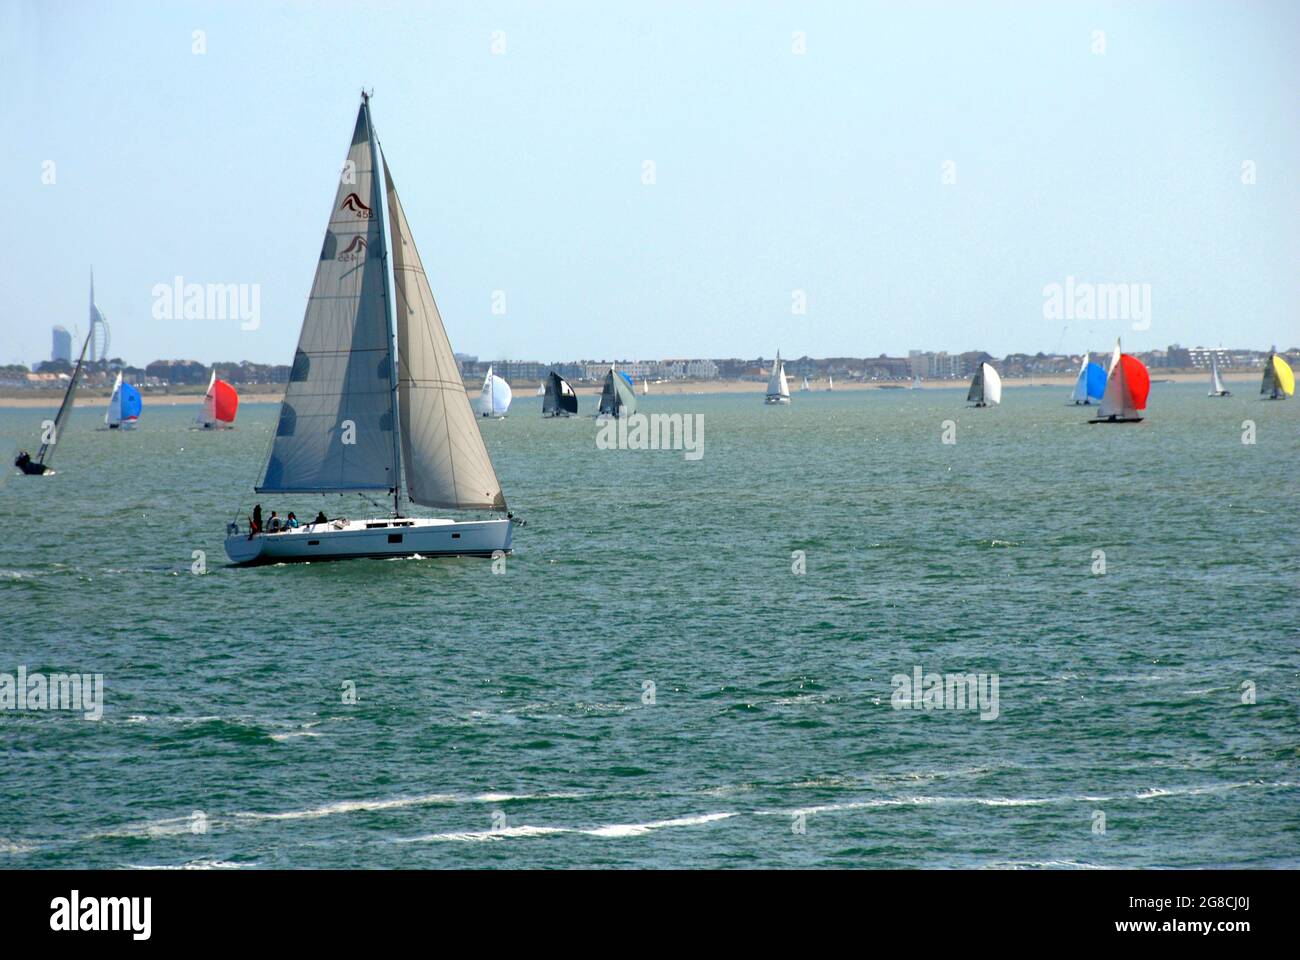 Yachts sailing on the Solent during Cowes Week regatta Stock Photo